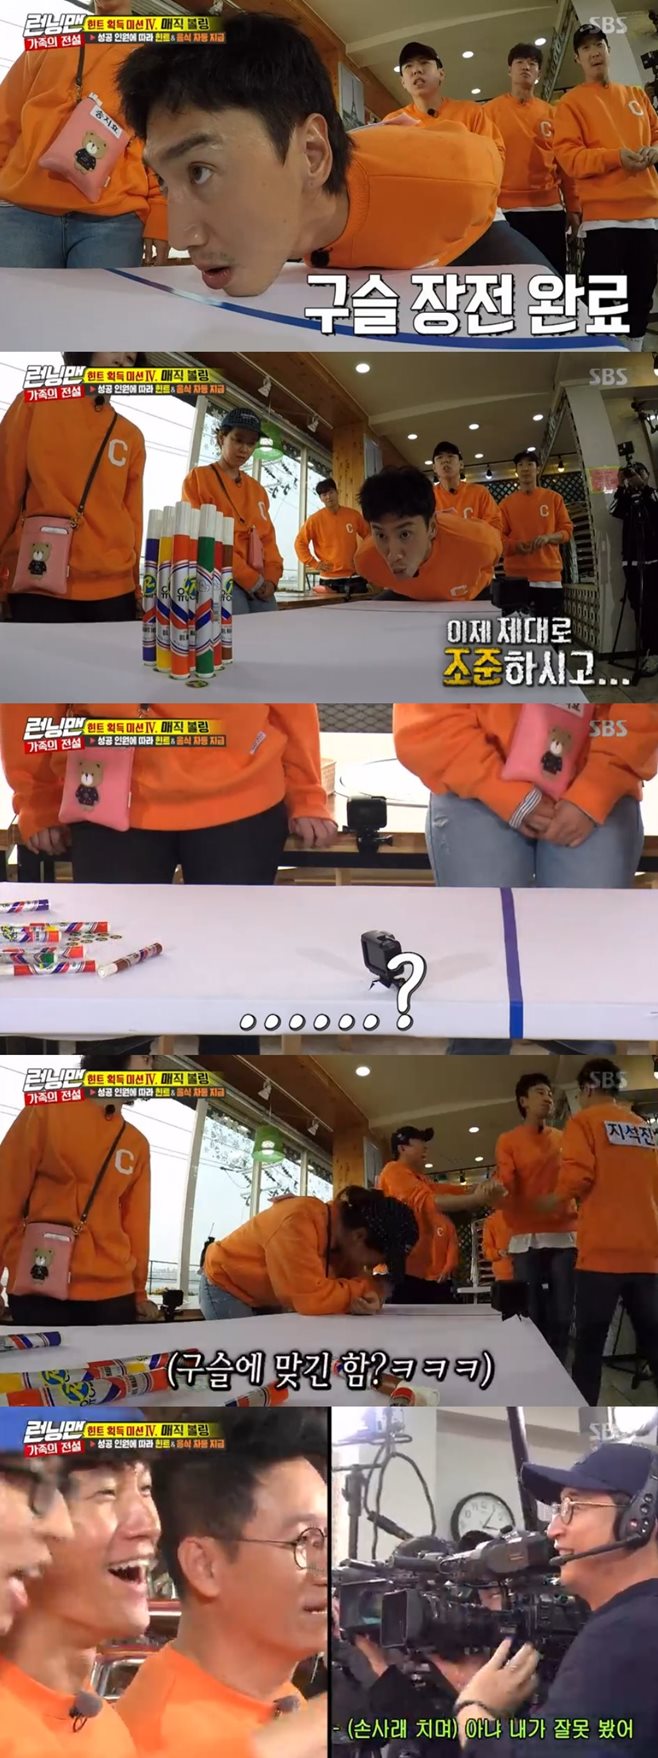 Running Man Lee Kwang-soos mouthballing captivated SightIn the SBS entertainment program Good Sunday - Running Man (hereinafter referred to as Running Man), which was broadcast on the evening of the 11th, eight members turned into eight siblings and played a family race.The members set up Magic and went on a bowling game with marble, among which Lee Kwang-soo refused to be ordinary and attracted Eye-catching.Lee Kwang-soo said, Ill go, and put marble into his mouth and prepared a marble to rob Sight.With Yang holding Lee Kwang-soos arm, Lee Kwang-soo fired marble with his mouth; a similar missile.Yoo Jae-seok expected Lee Kwang-soo to be a hero if you do this, and Lee Kwang-soo aimed and succeeded in Strike.Members loved Lee Kwang-soos ability to applaud.Suddenly, however, a camera director reported that Magic fell before marble reached, and the members protested strongly, led by Kim Jong Kook.The camera director said, I saw it wrong.